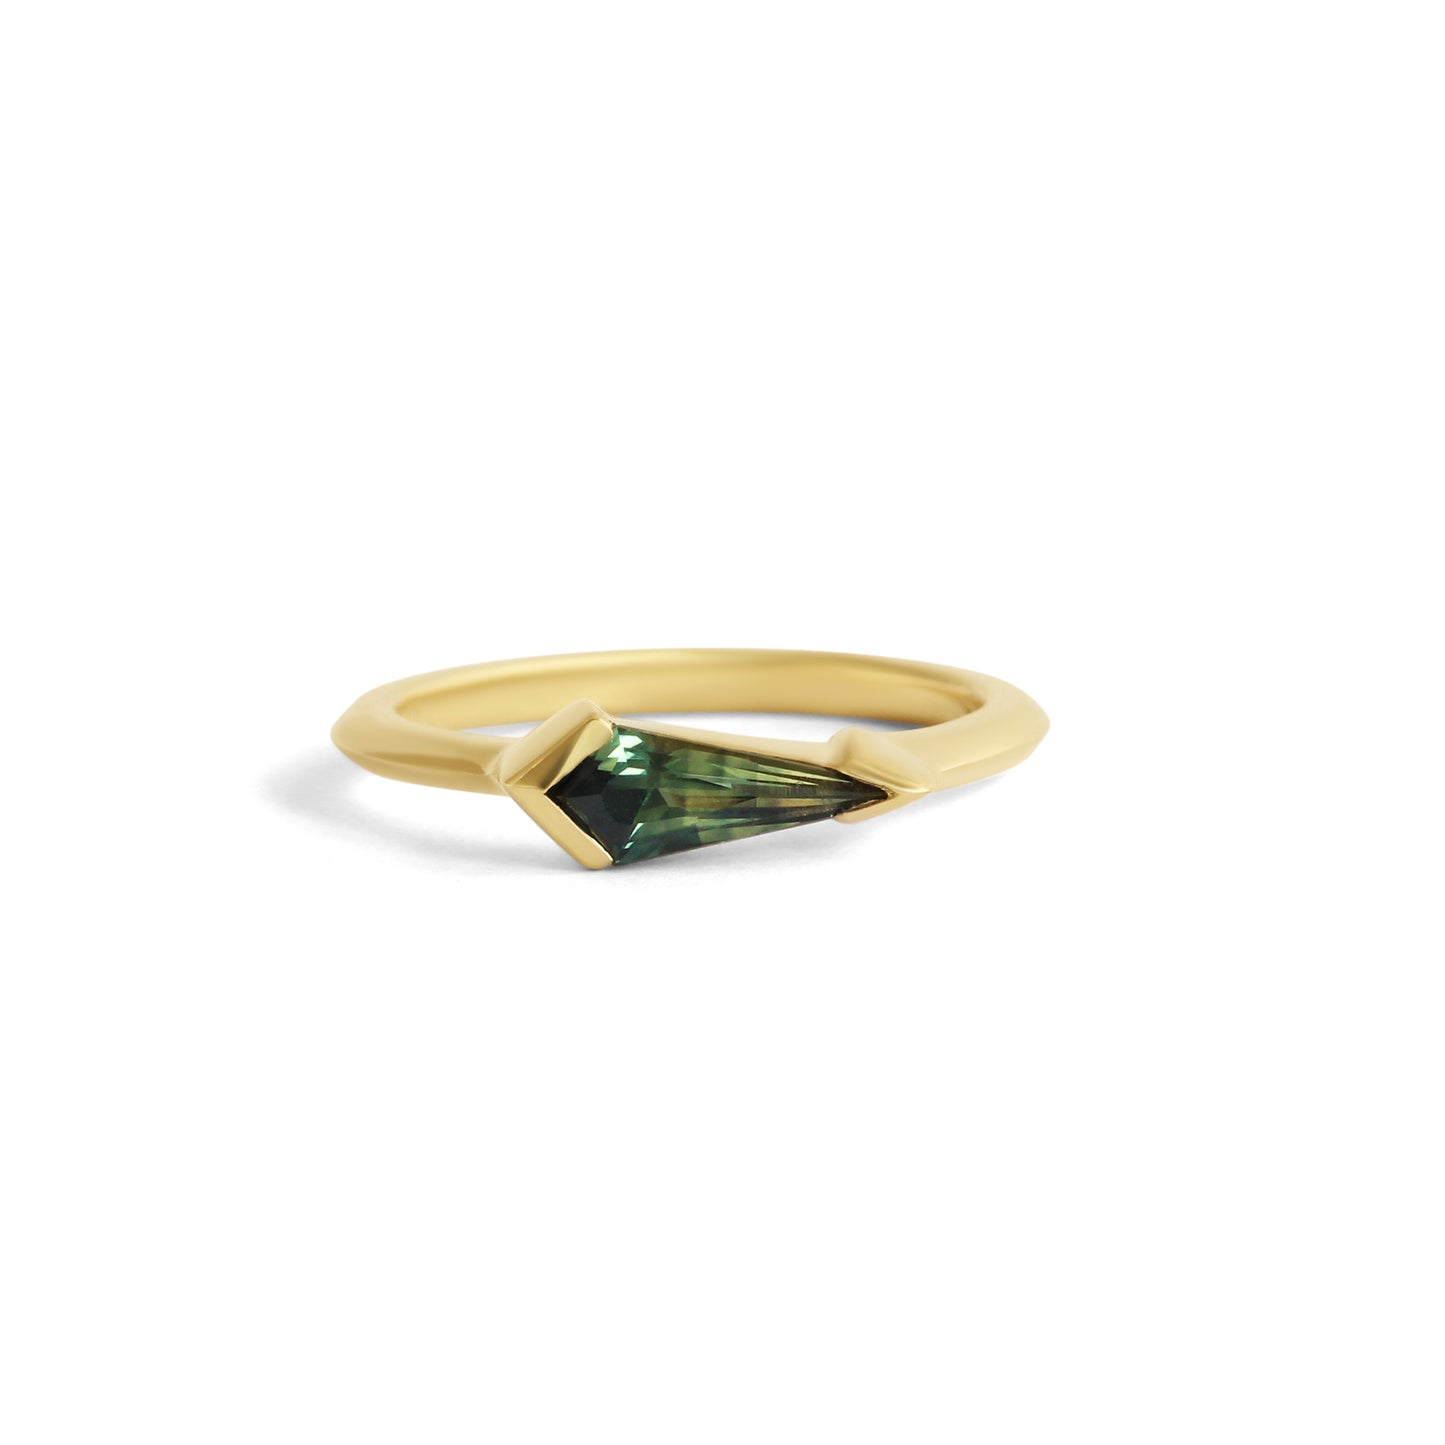 Load image into Gallery viewer, Sideways Ring / Australian Bicolor Sapphire front view
